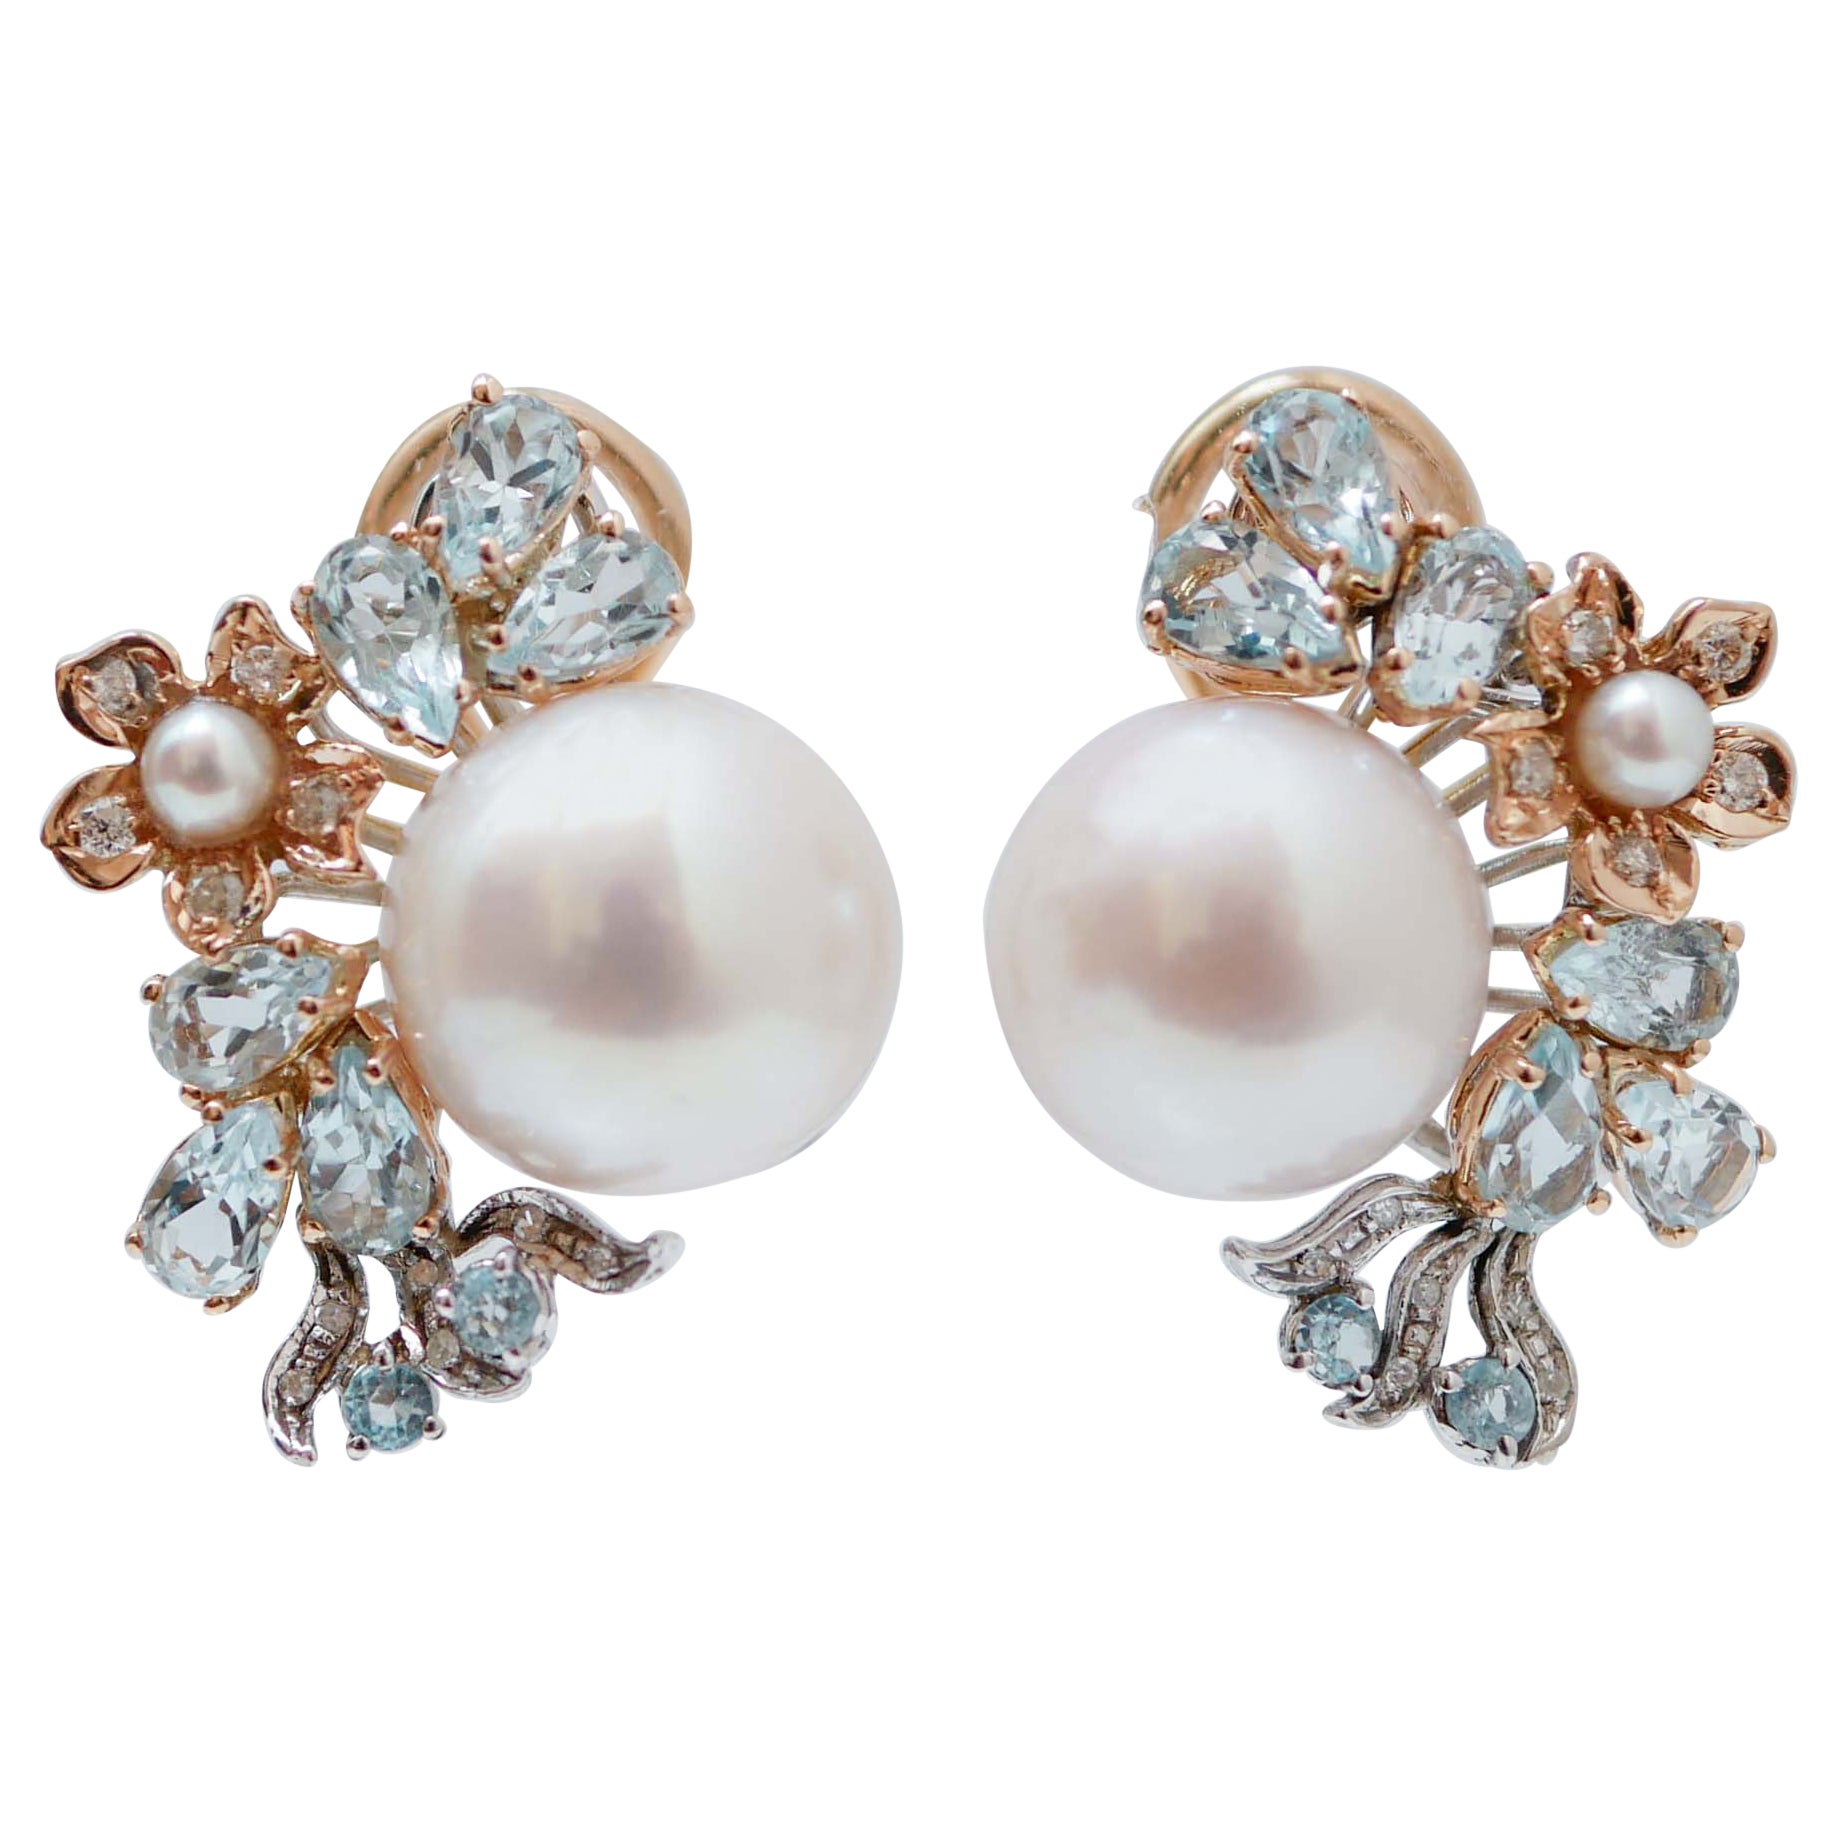 Pearls, Topazs, Diamonds, 14 Karat Rose and White Gold Earrings. For Sale